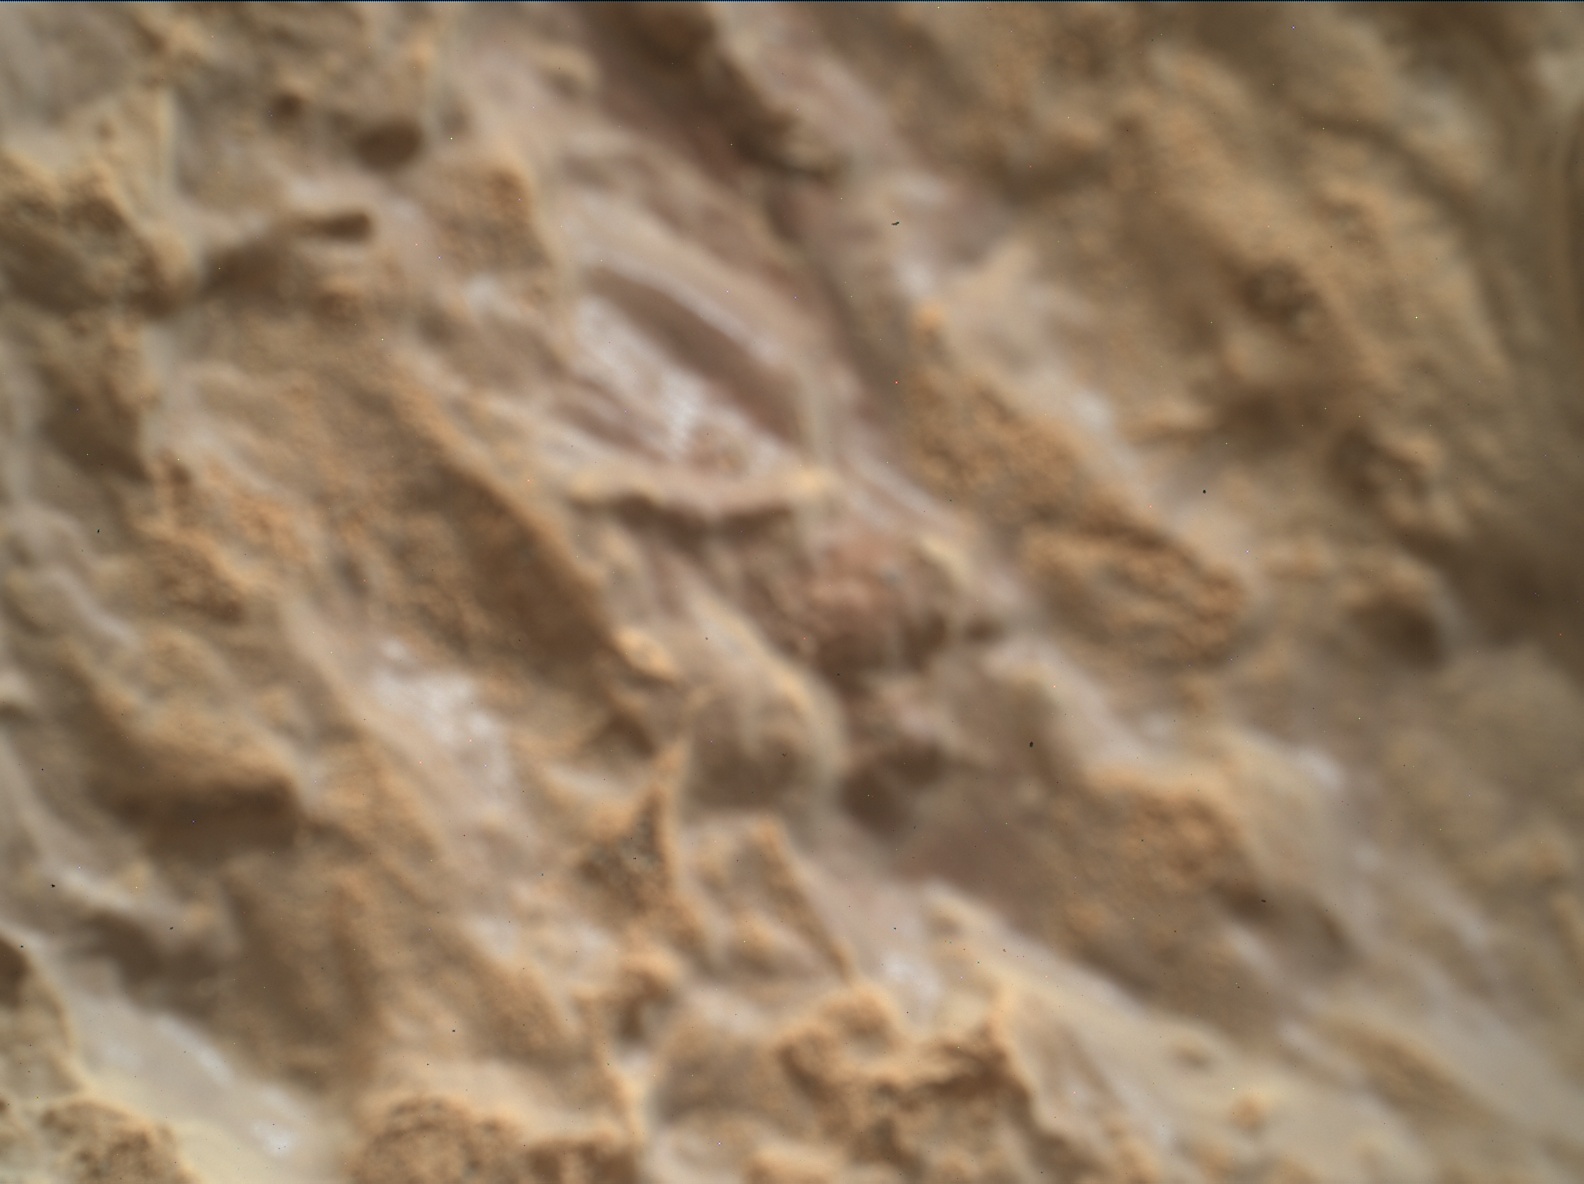 Nasa's Mars rover Curiosity acquired this image using its Mars Hand Lens Imager (MAHLI) on Sol 2564